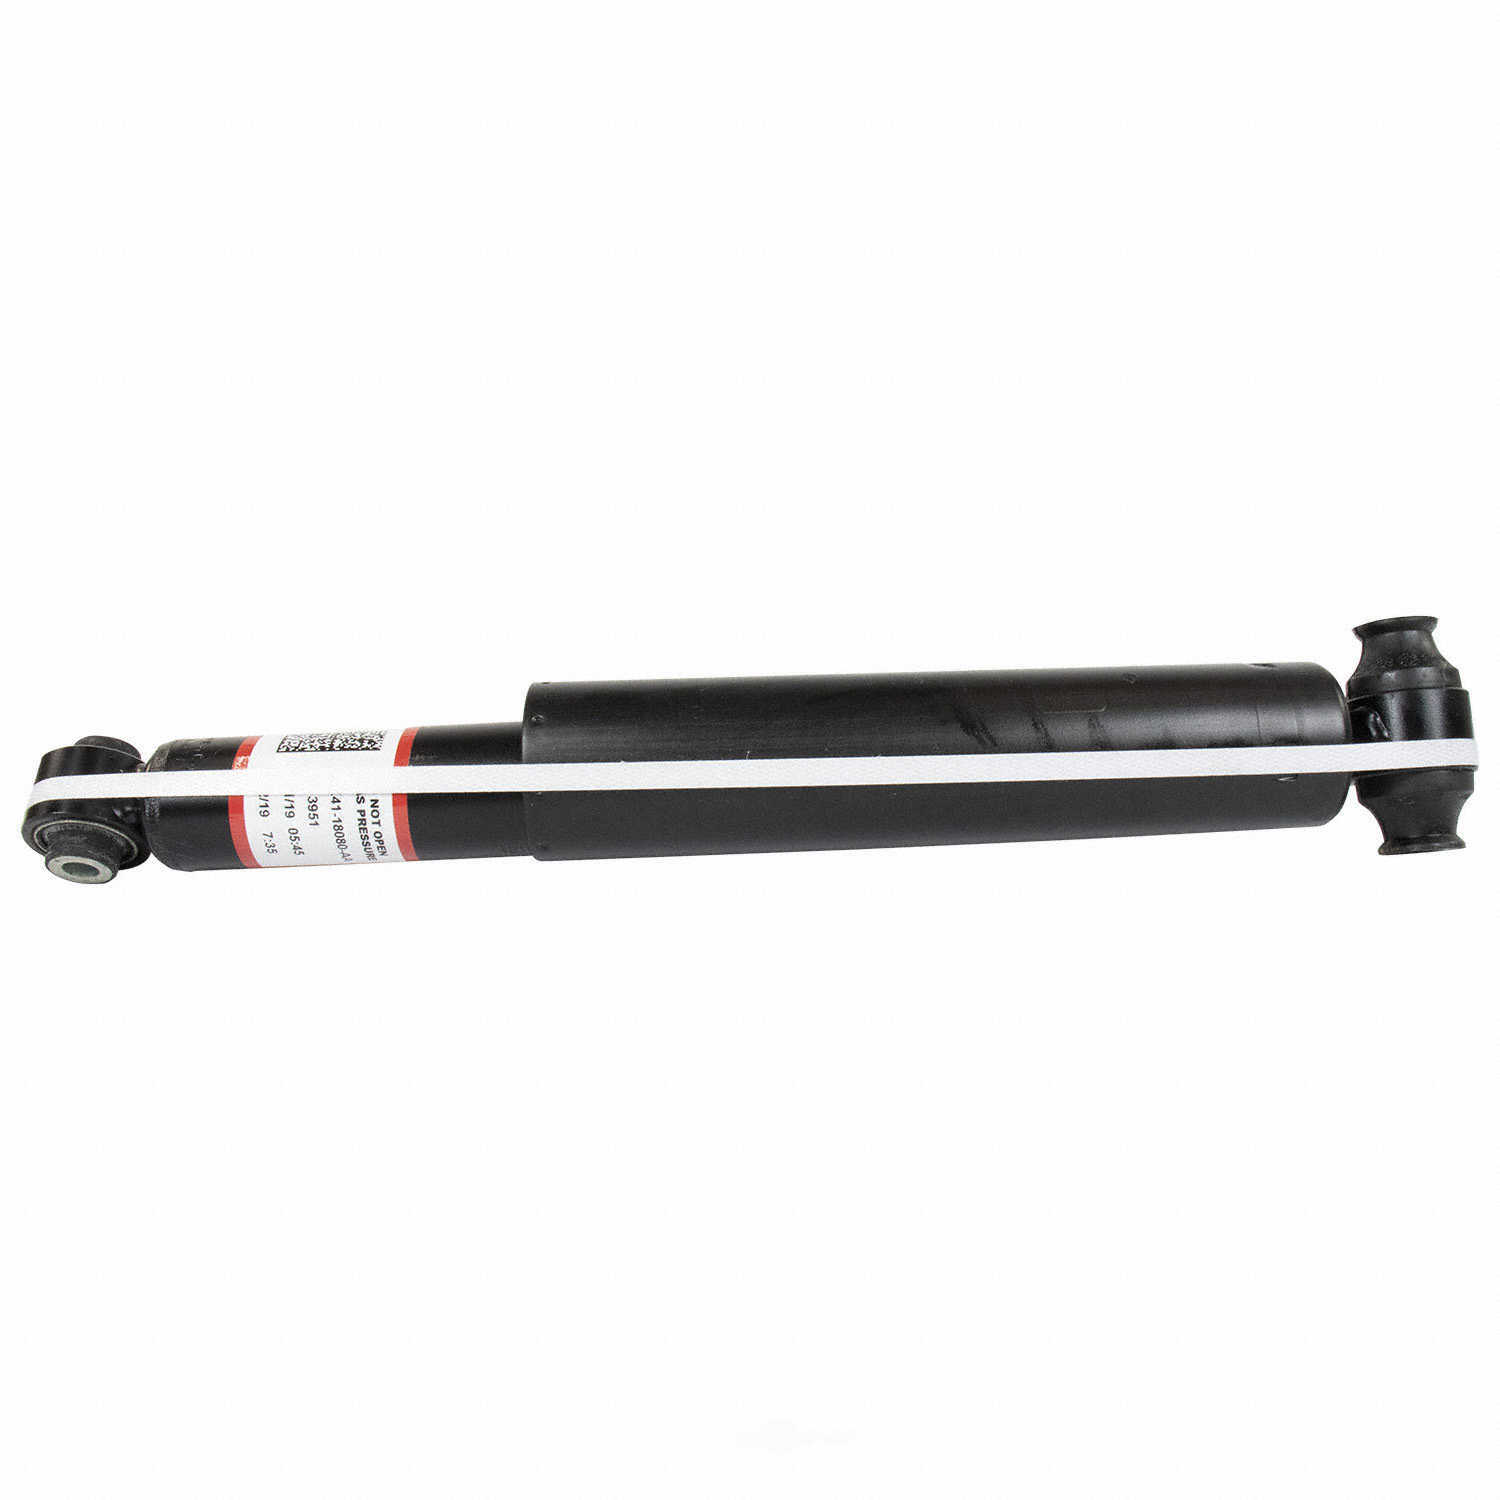 MOTORCRAFT - Shock ABSorber - New (With ABS Brakes, Rear) - MOT ASH-24722